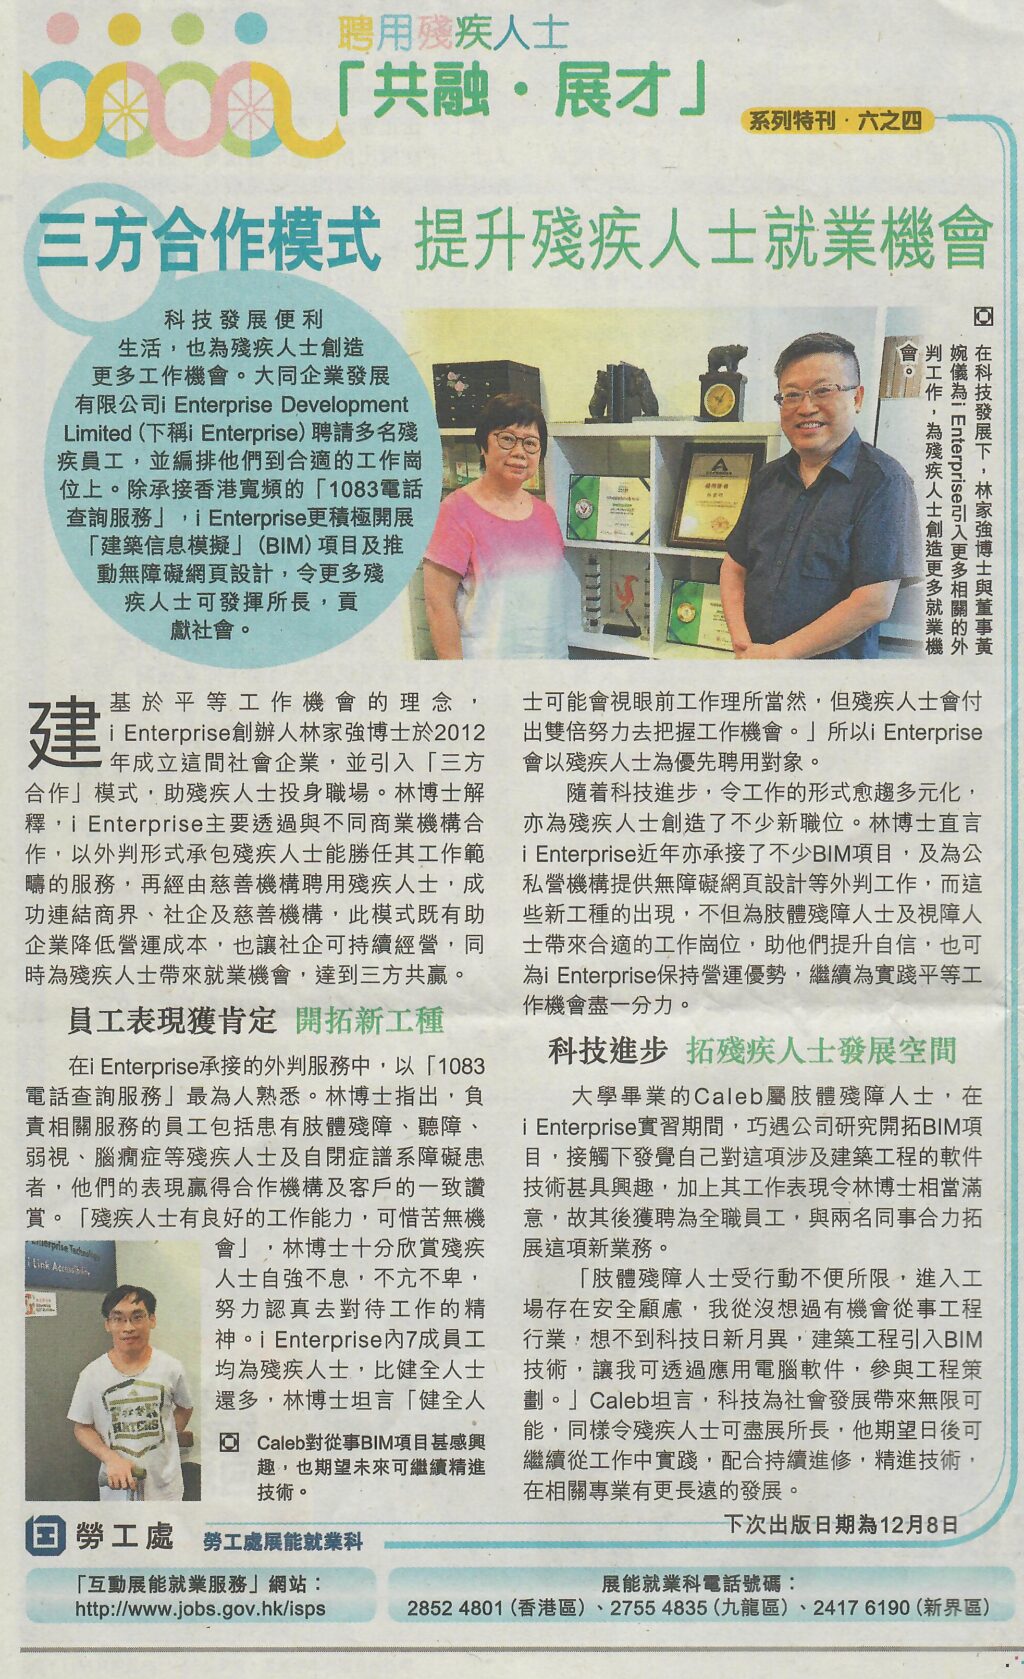 Article about the interview by the Hong Kong Economic Times